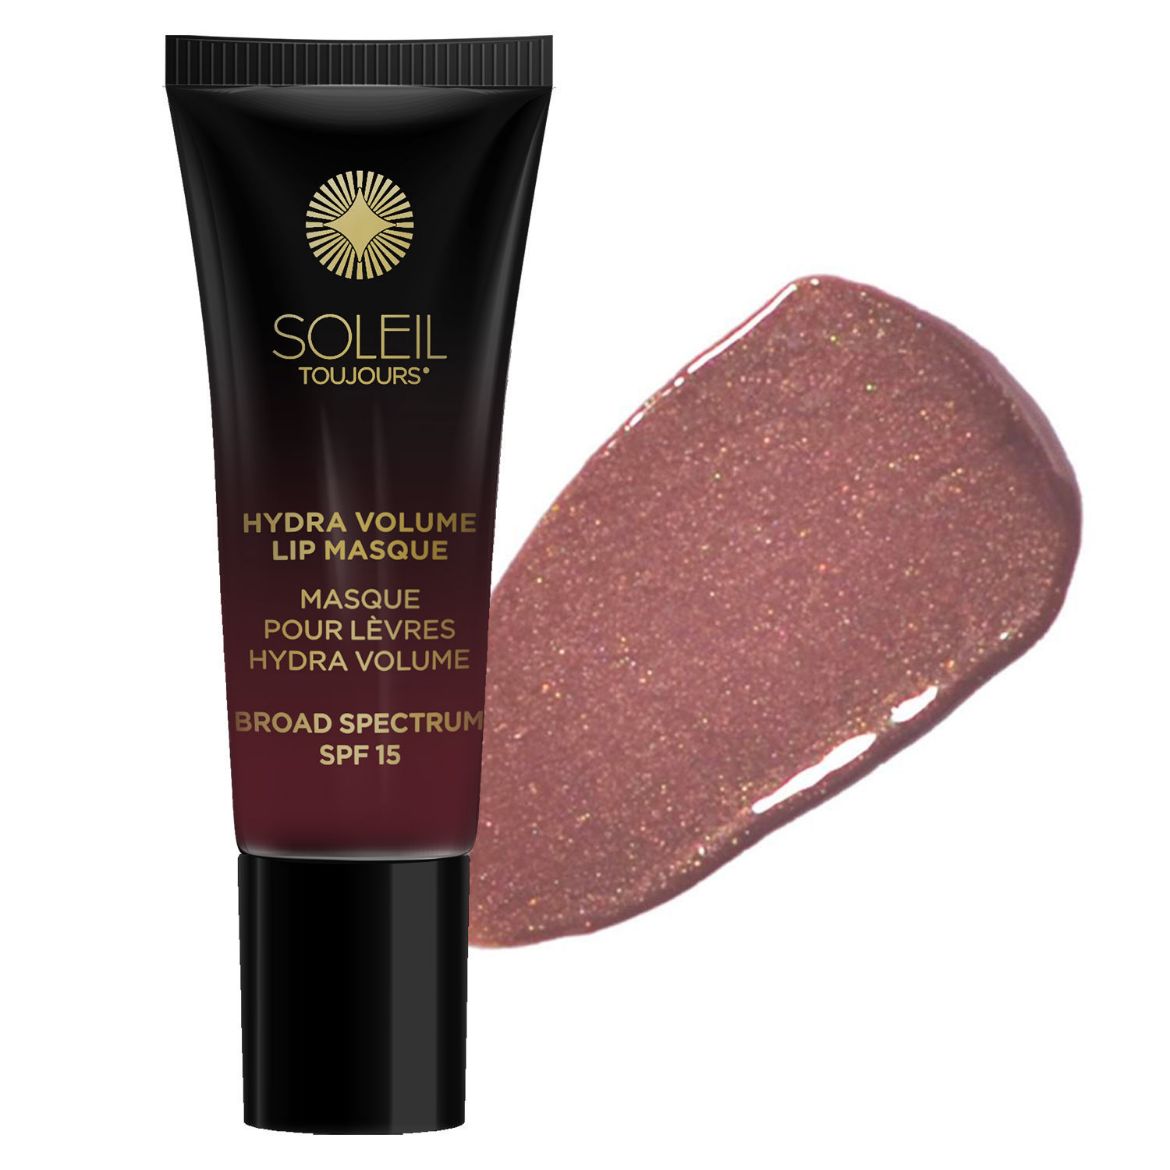 Image of Soleil Toujours Mineral Hydra Volume Lip Masque SPF 15 - Indochine (10ml)